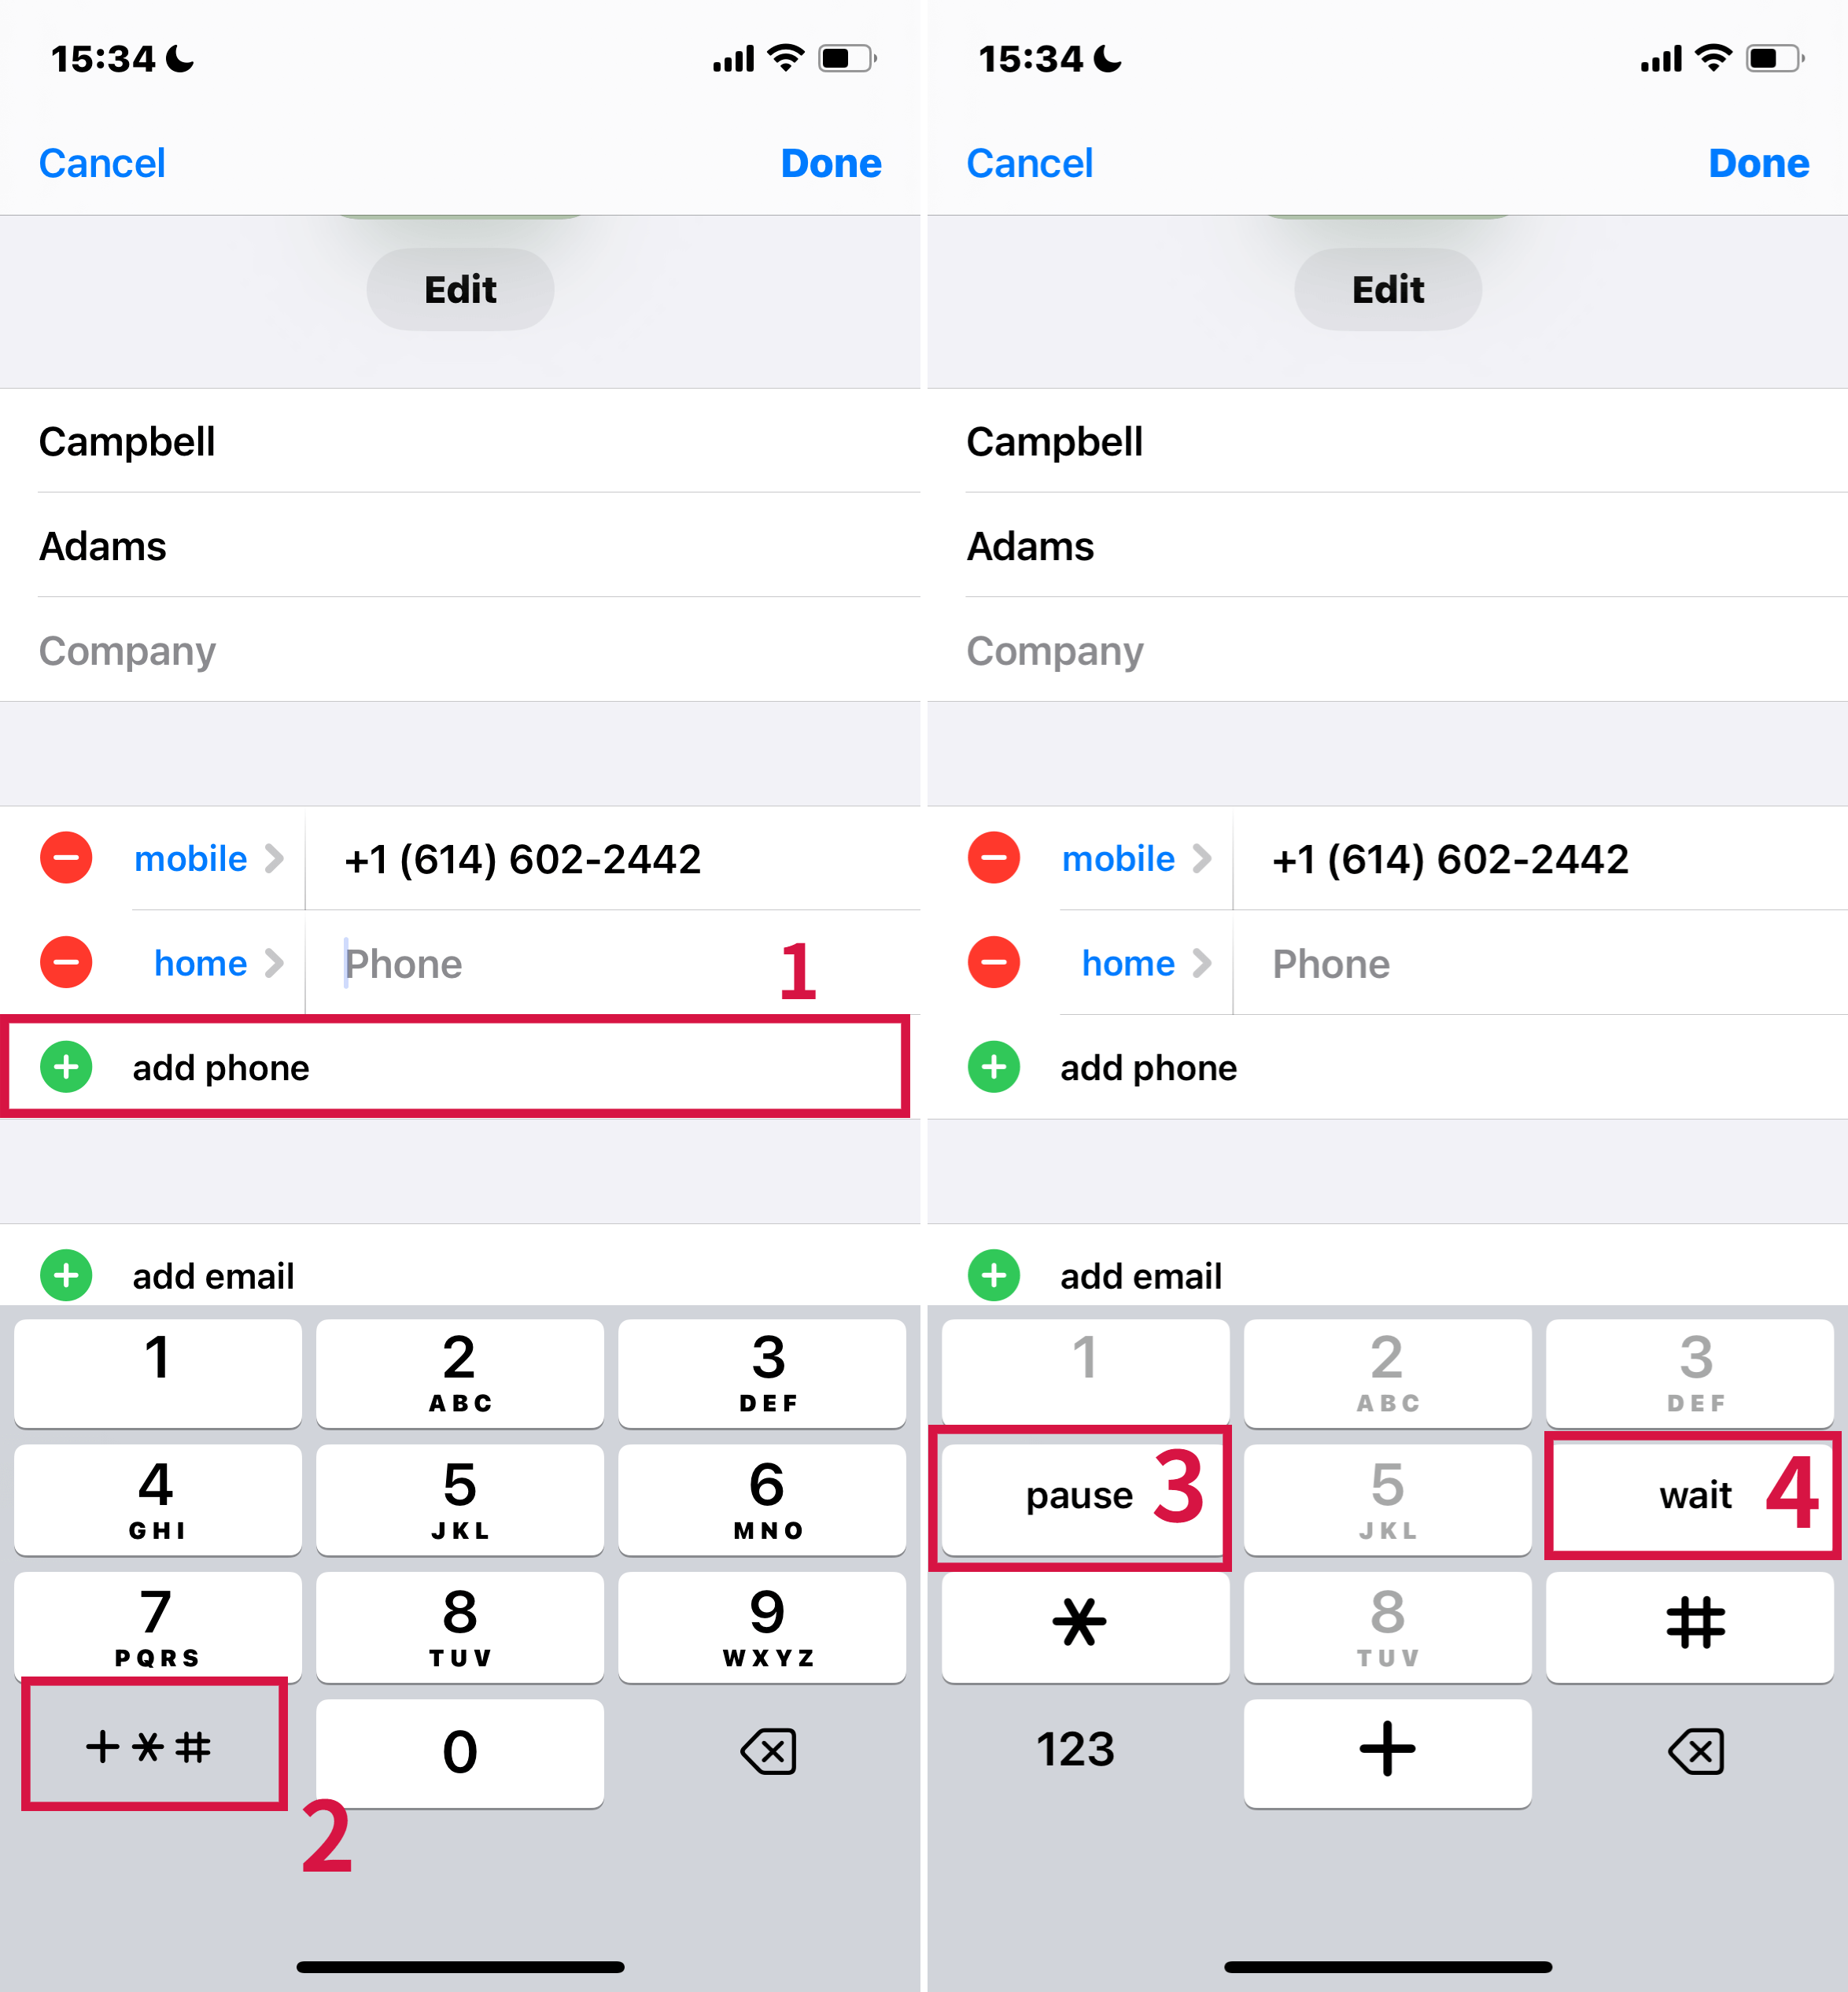 Steps to Automating Extension or Passcode Dialing on iPhone